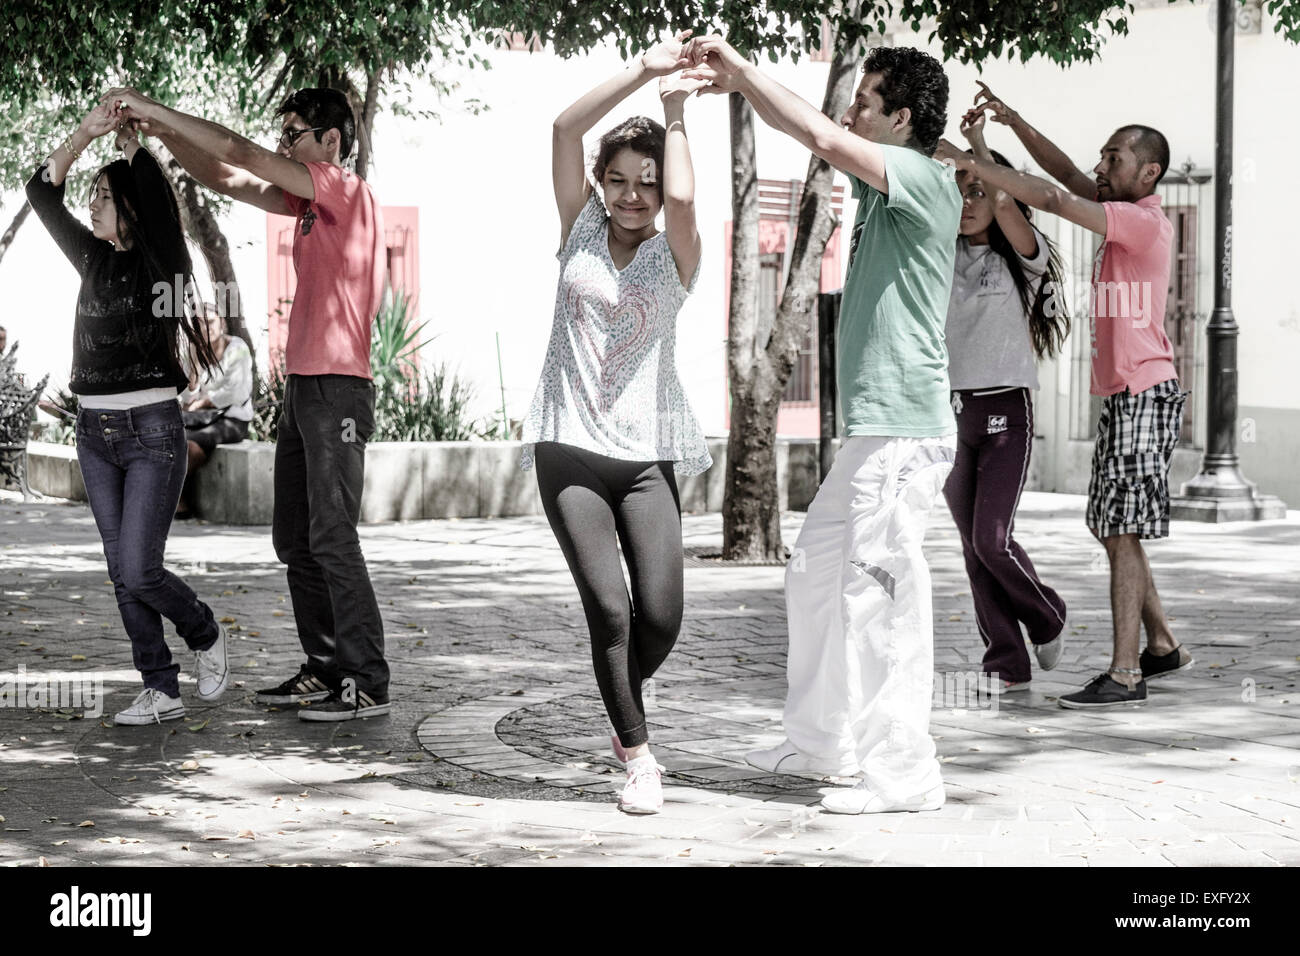 Three young Hispanic couples practicing salsa dancing in an outdoor courtyard in Oaxaca Mexico Stock Photo